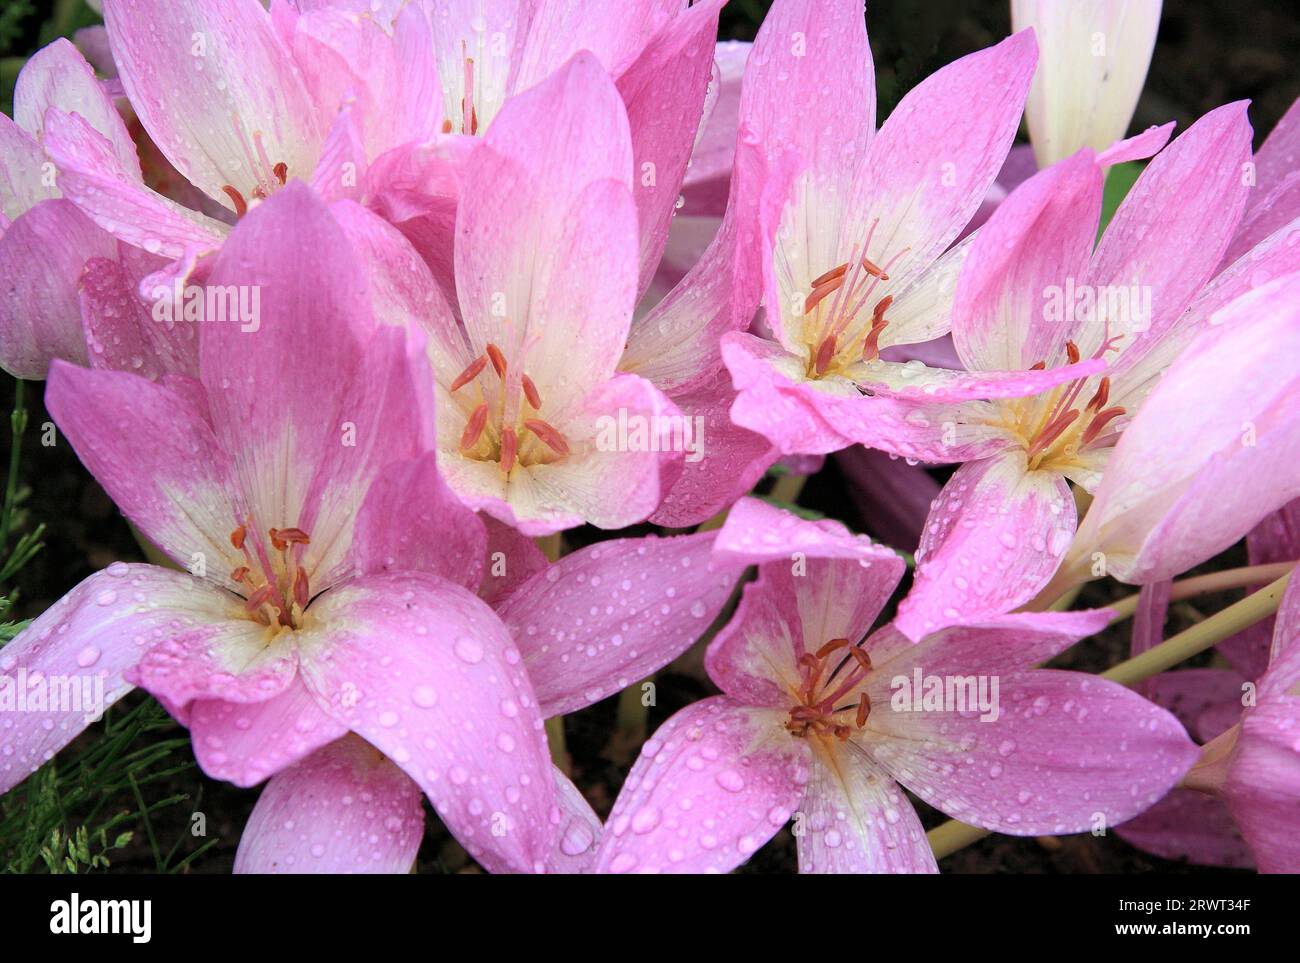 Some flowering plants of the autumn crocus, full size Stock Photo